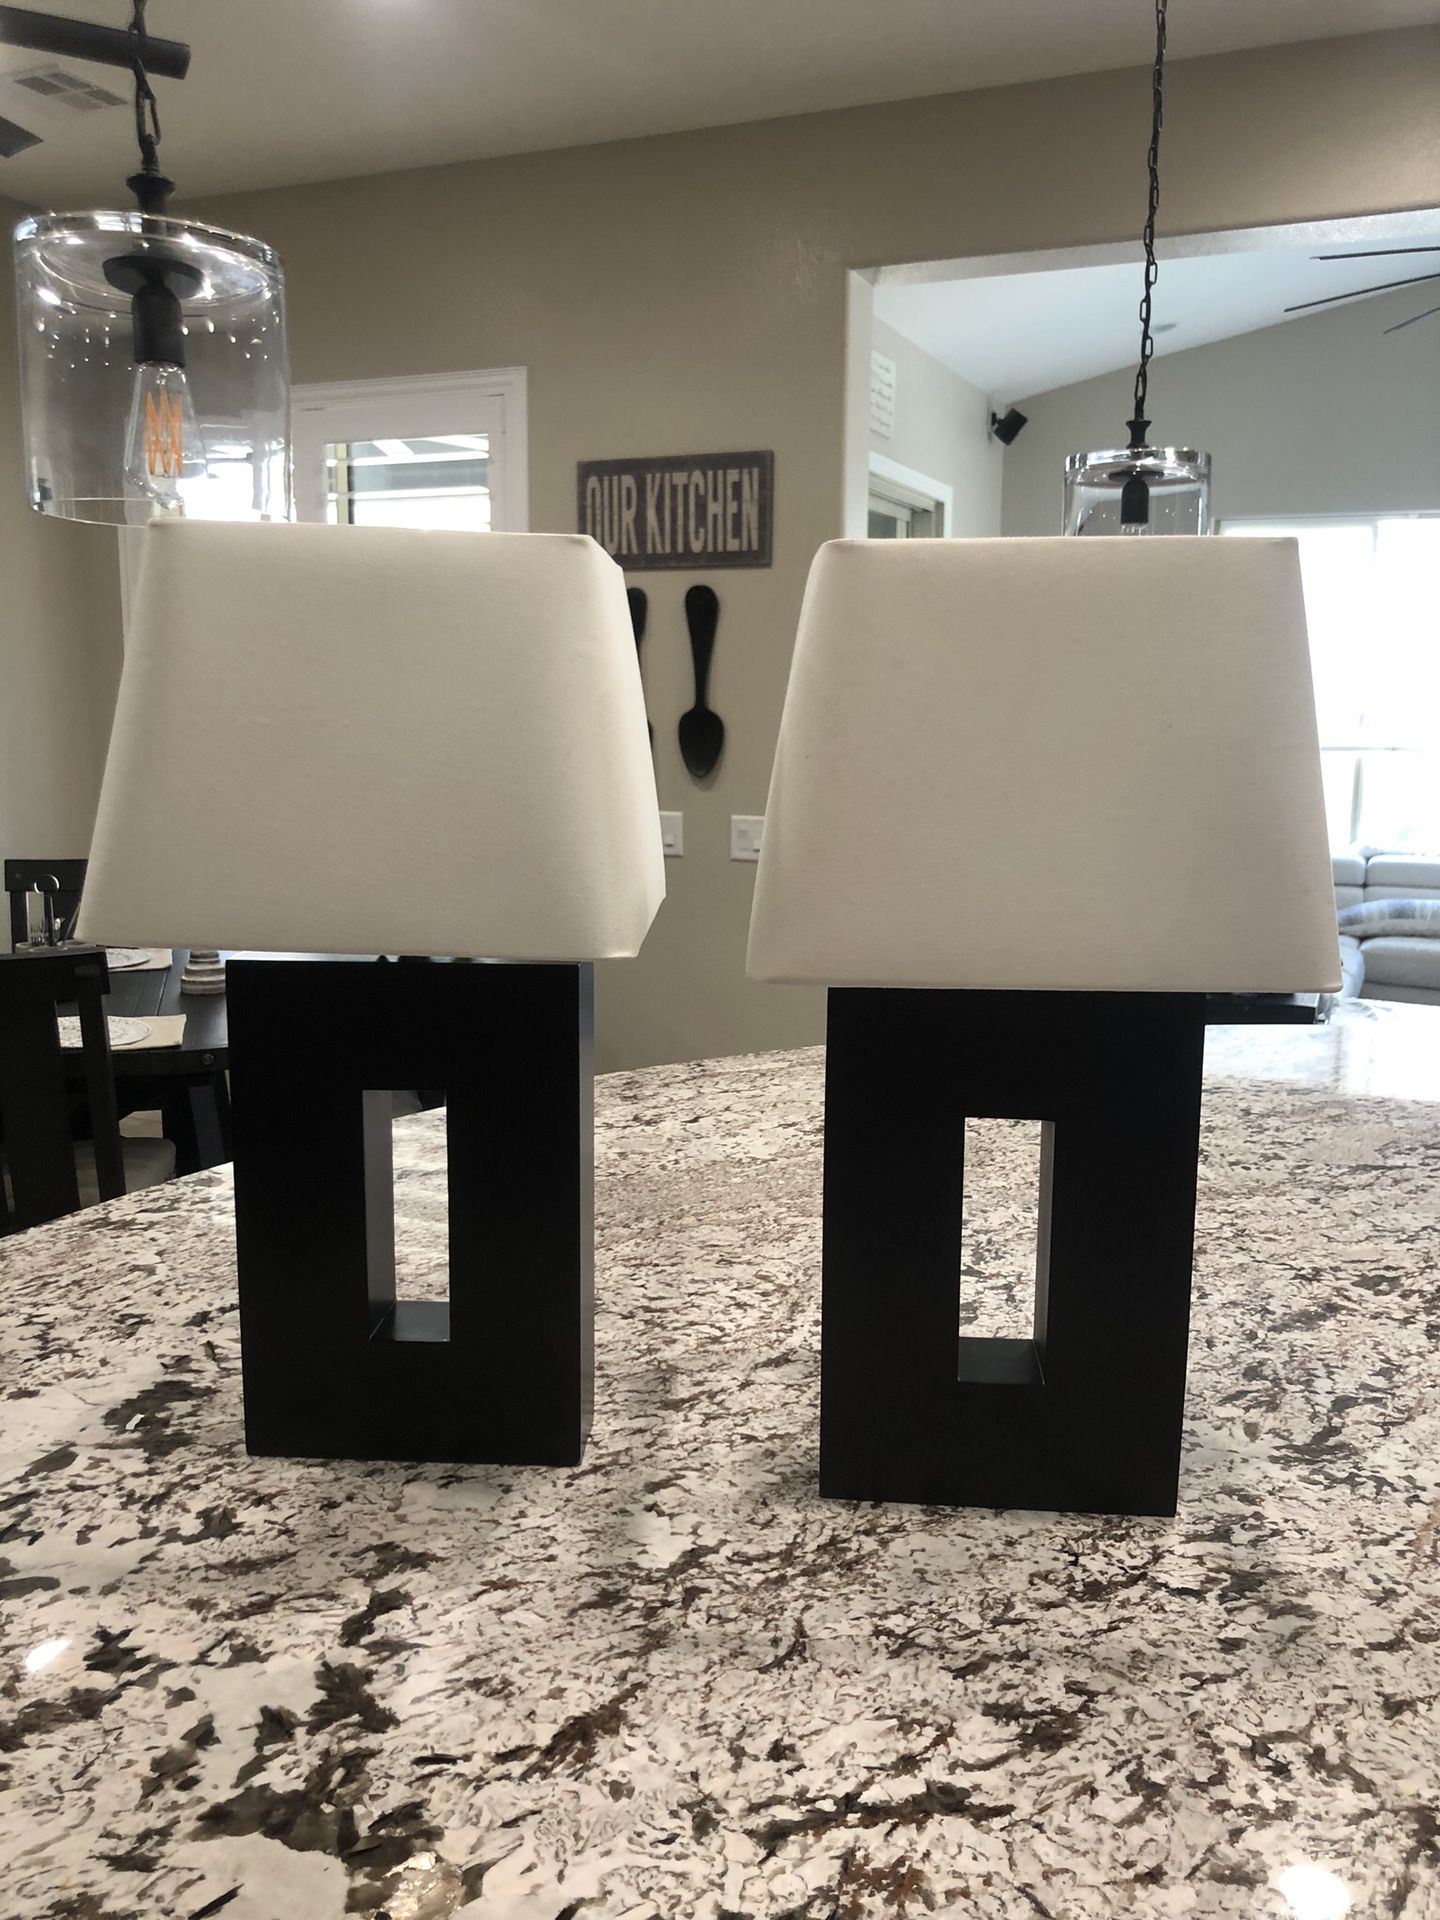 (2) Dark brown heavy lamps with cream colored shades